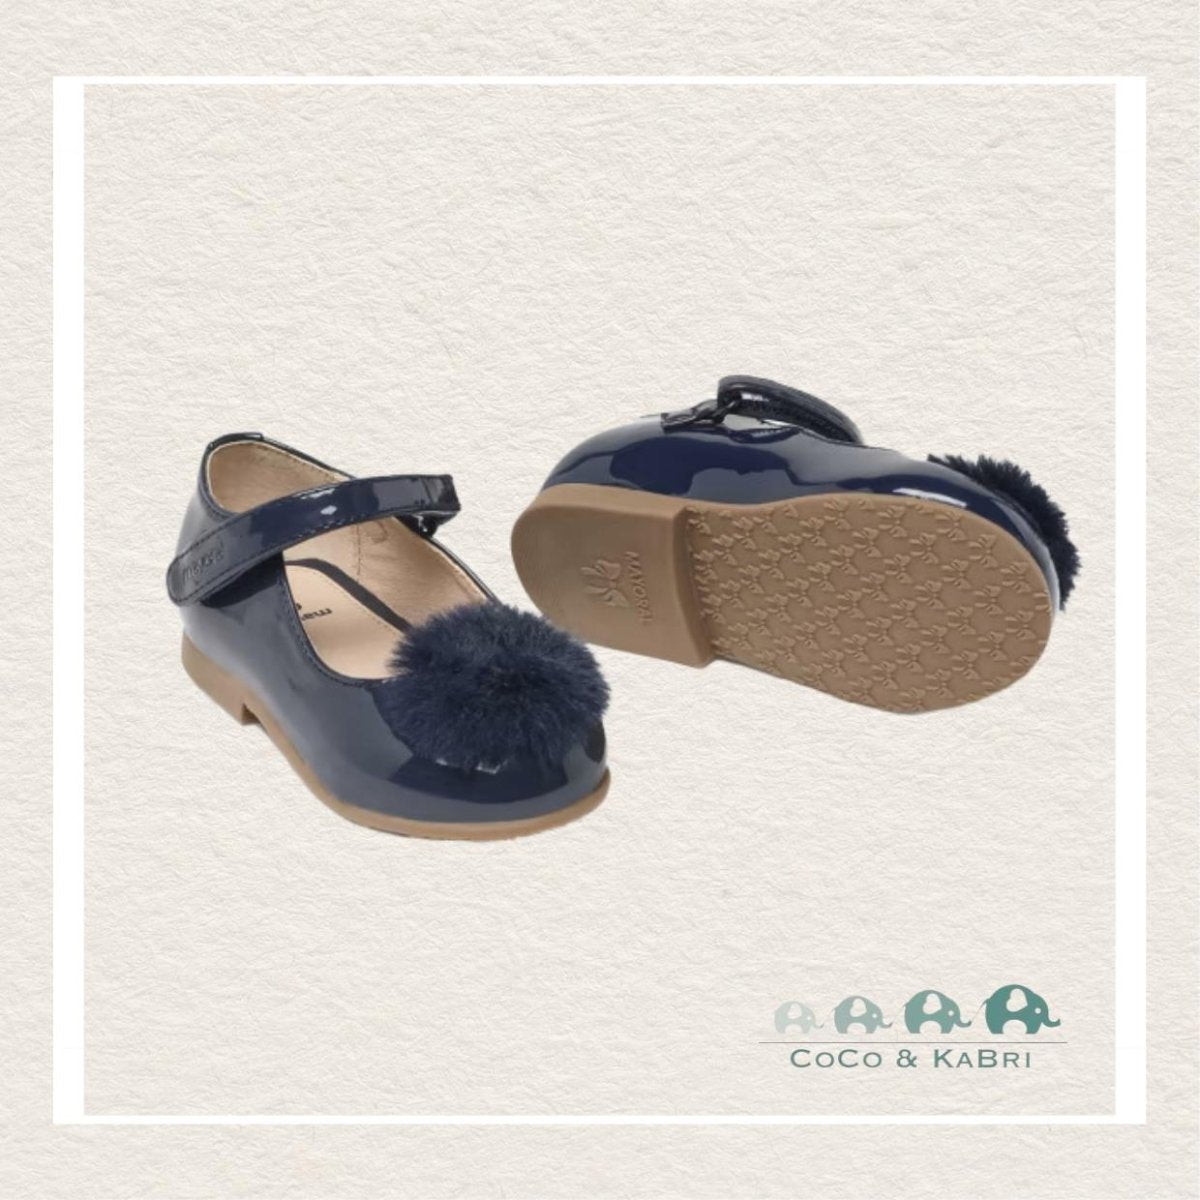 Mayoral: Pom pom mary janes sustainable leather baby - Navy - CoCo & KaBri